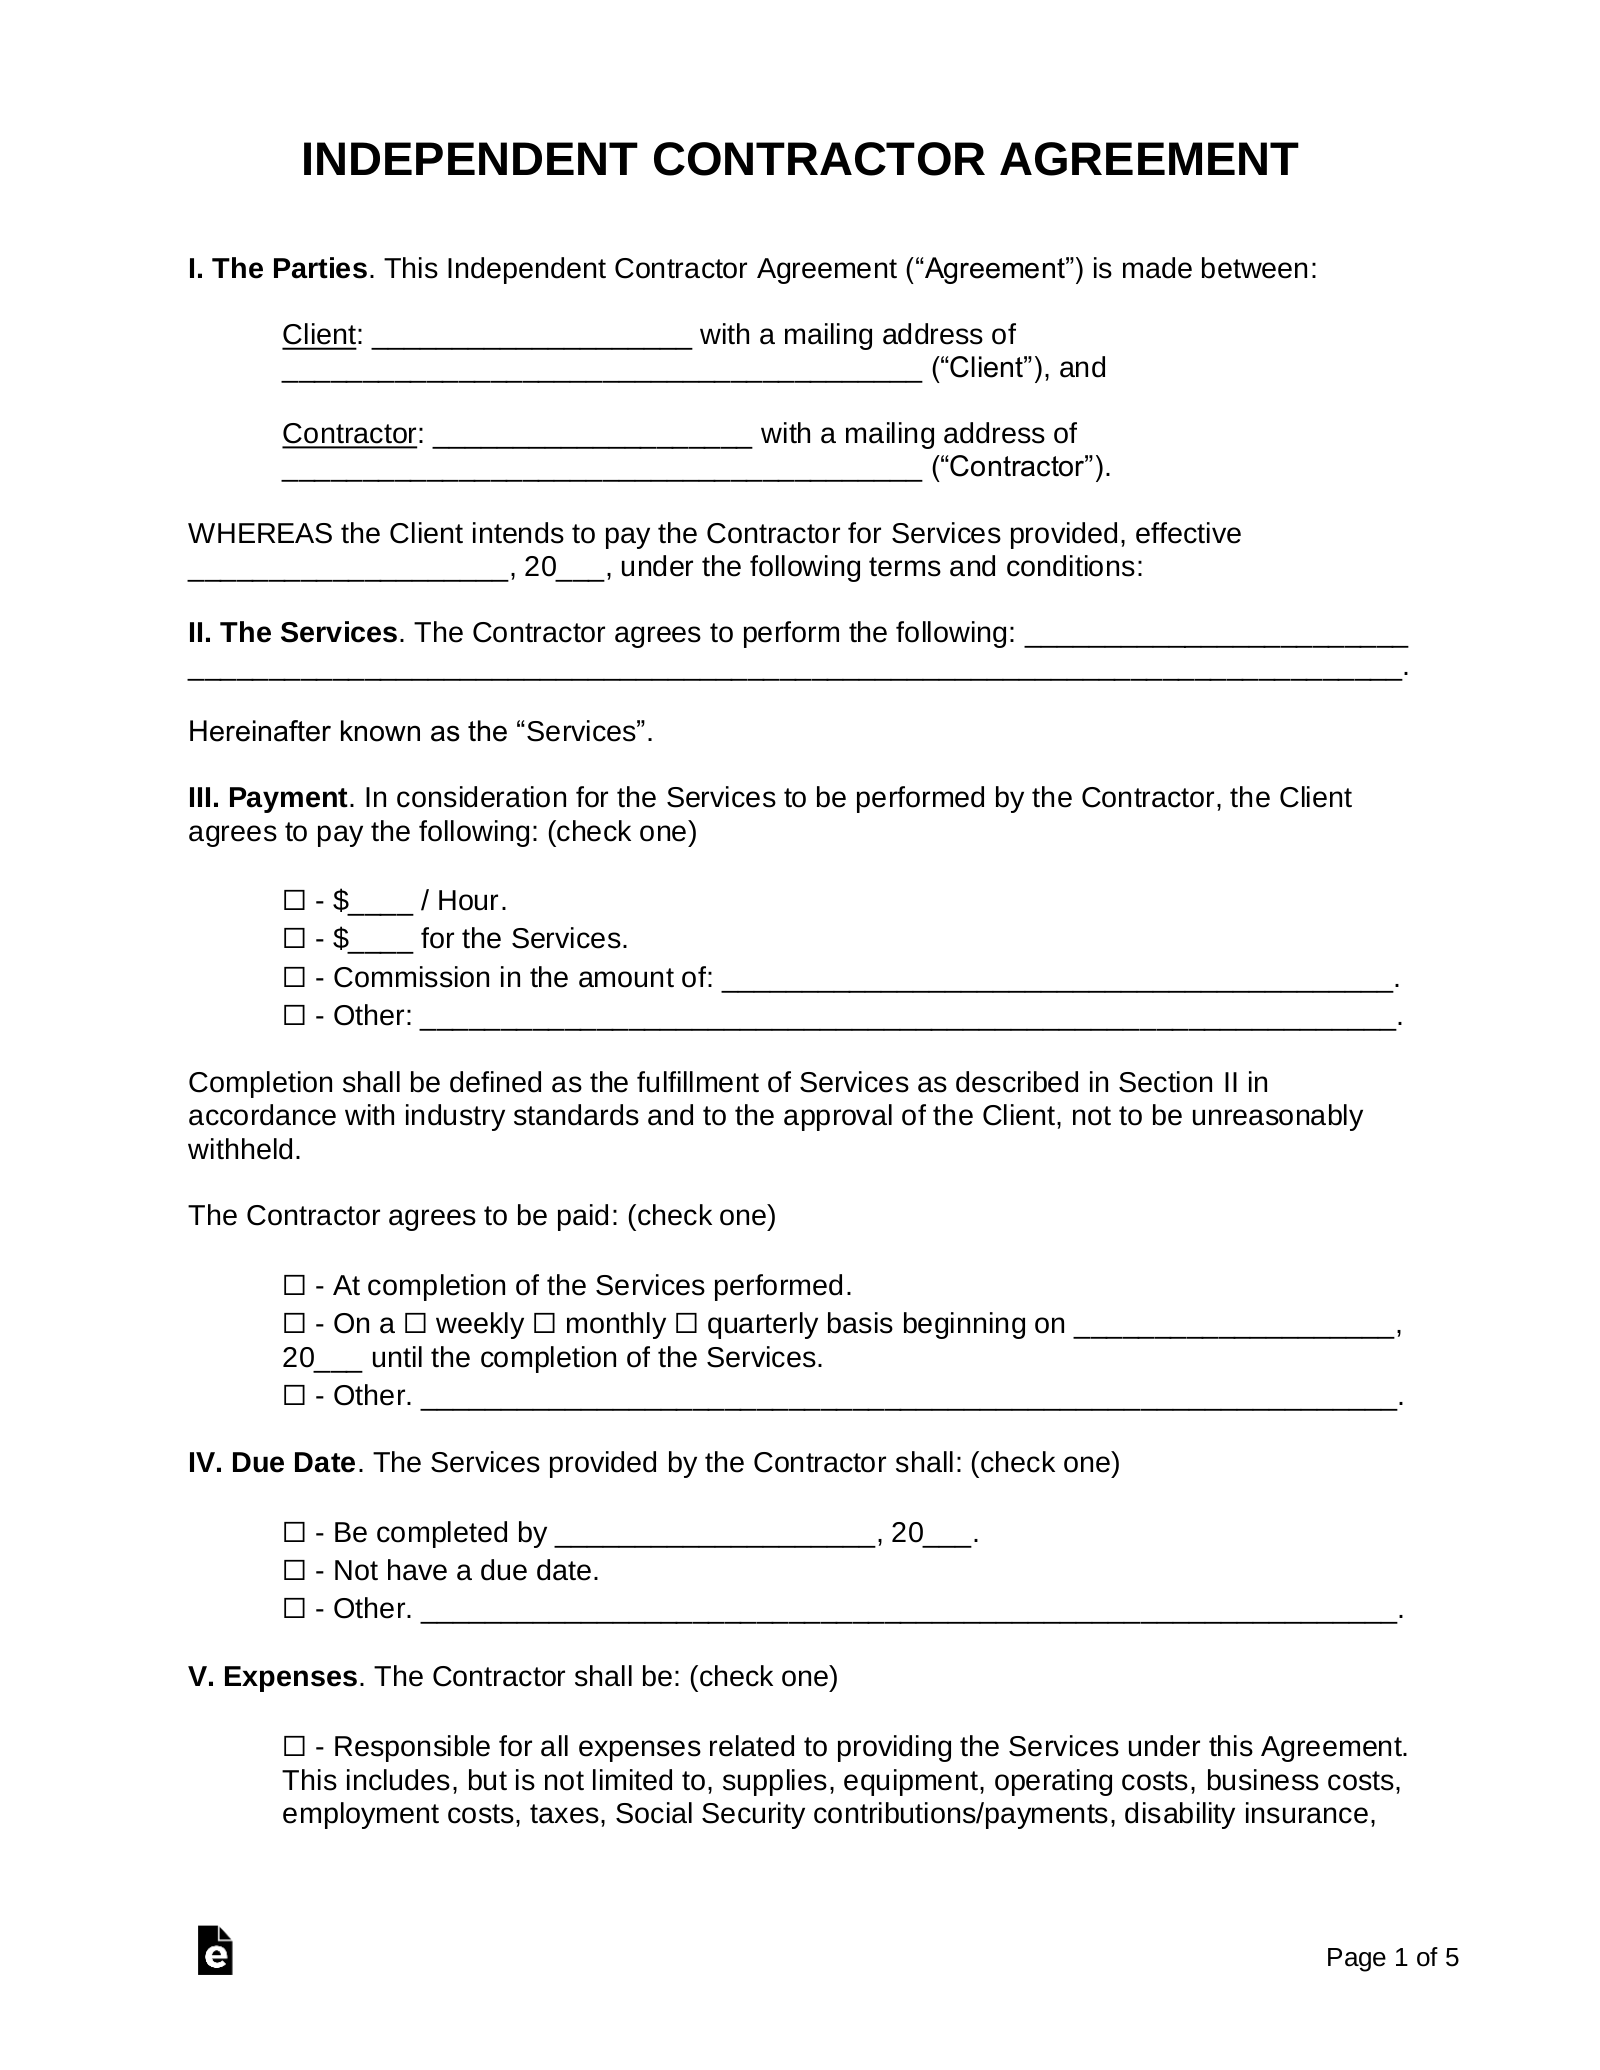 Statement Of Work Contract Template from eforms.com